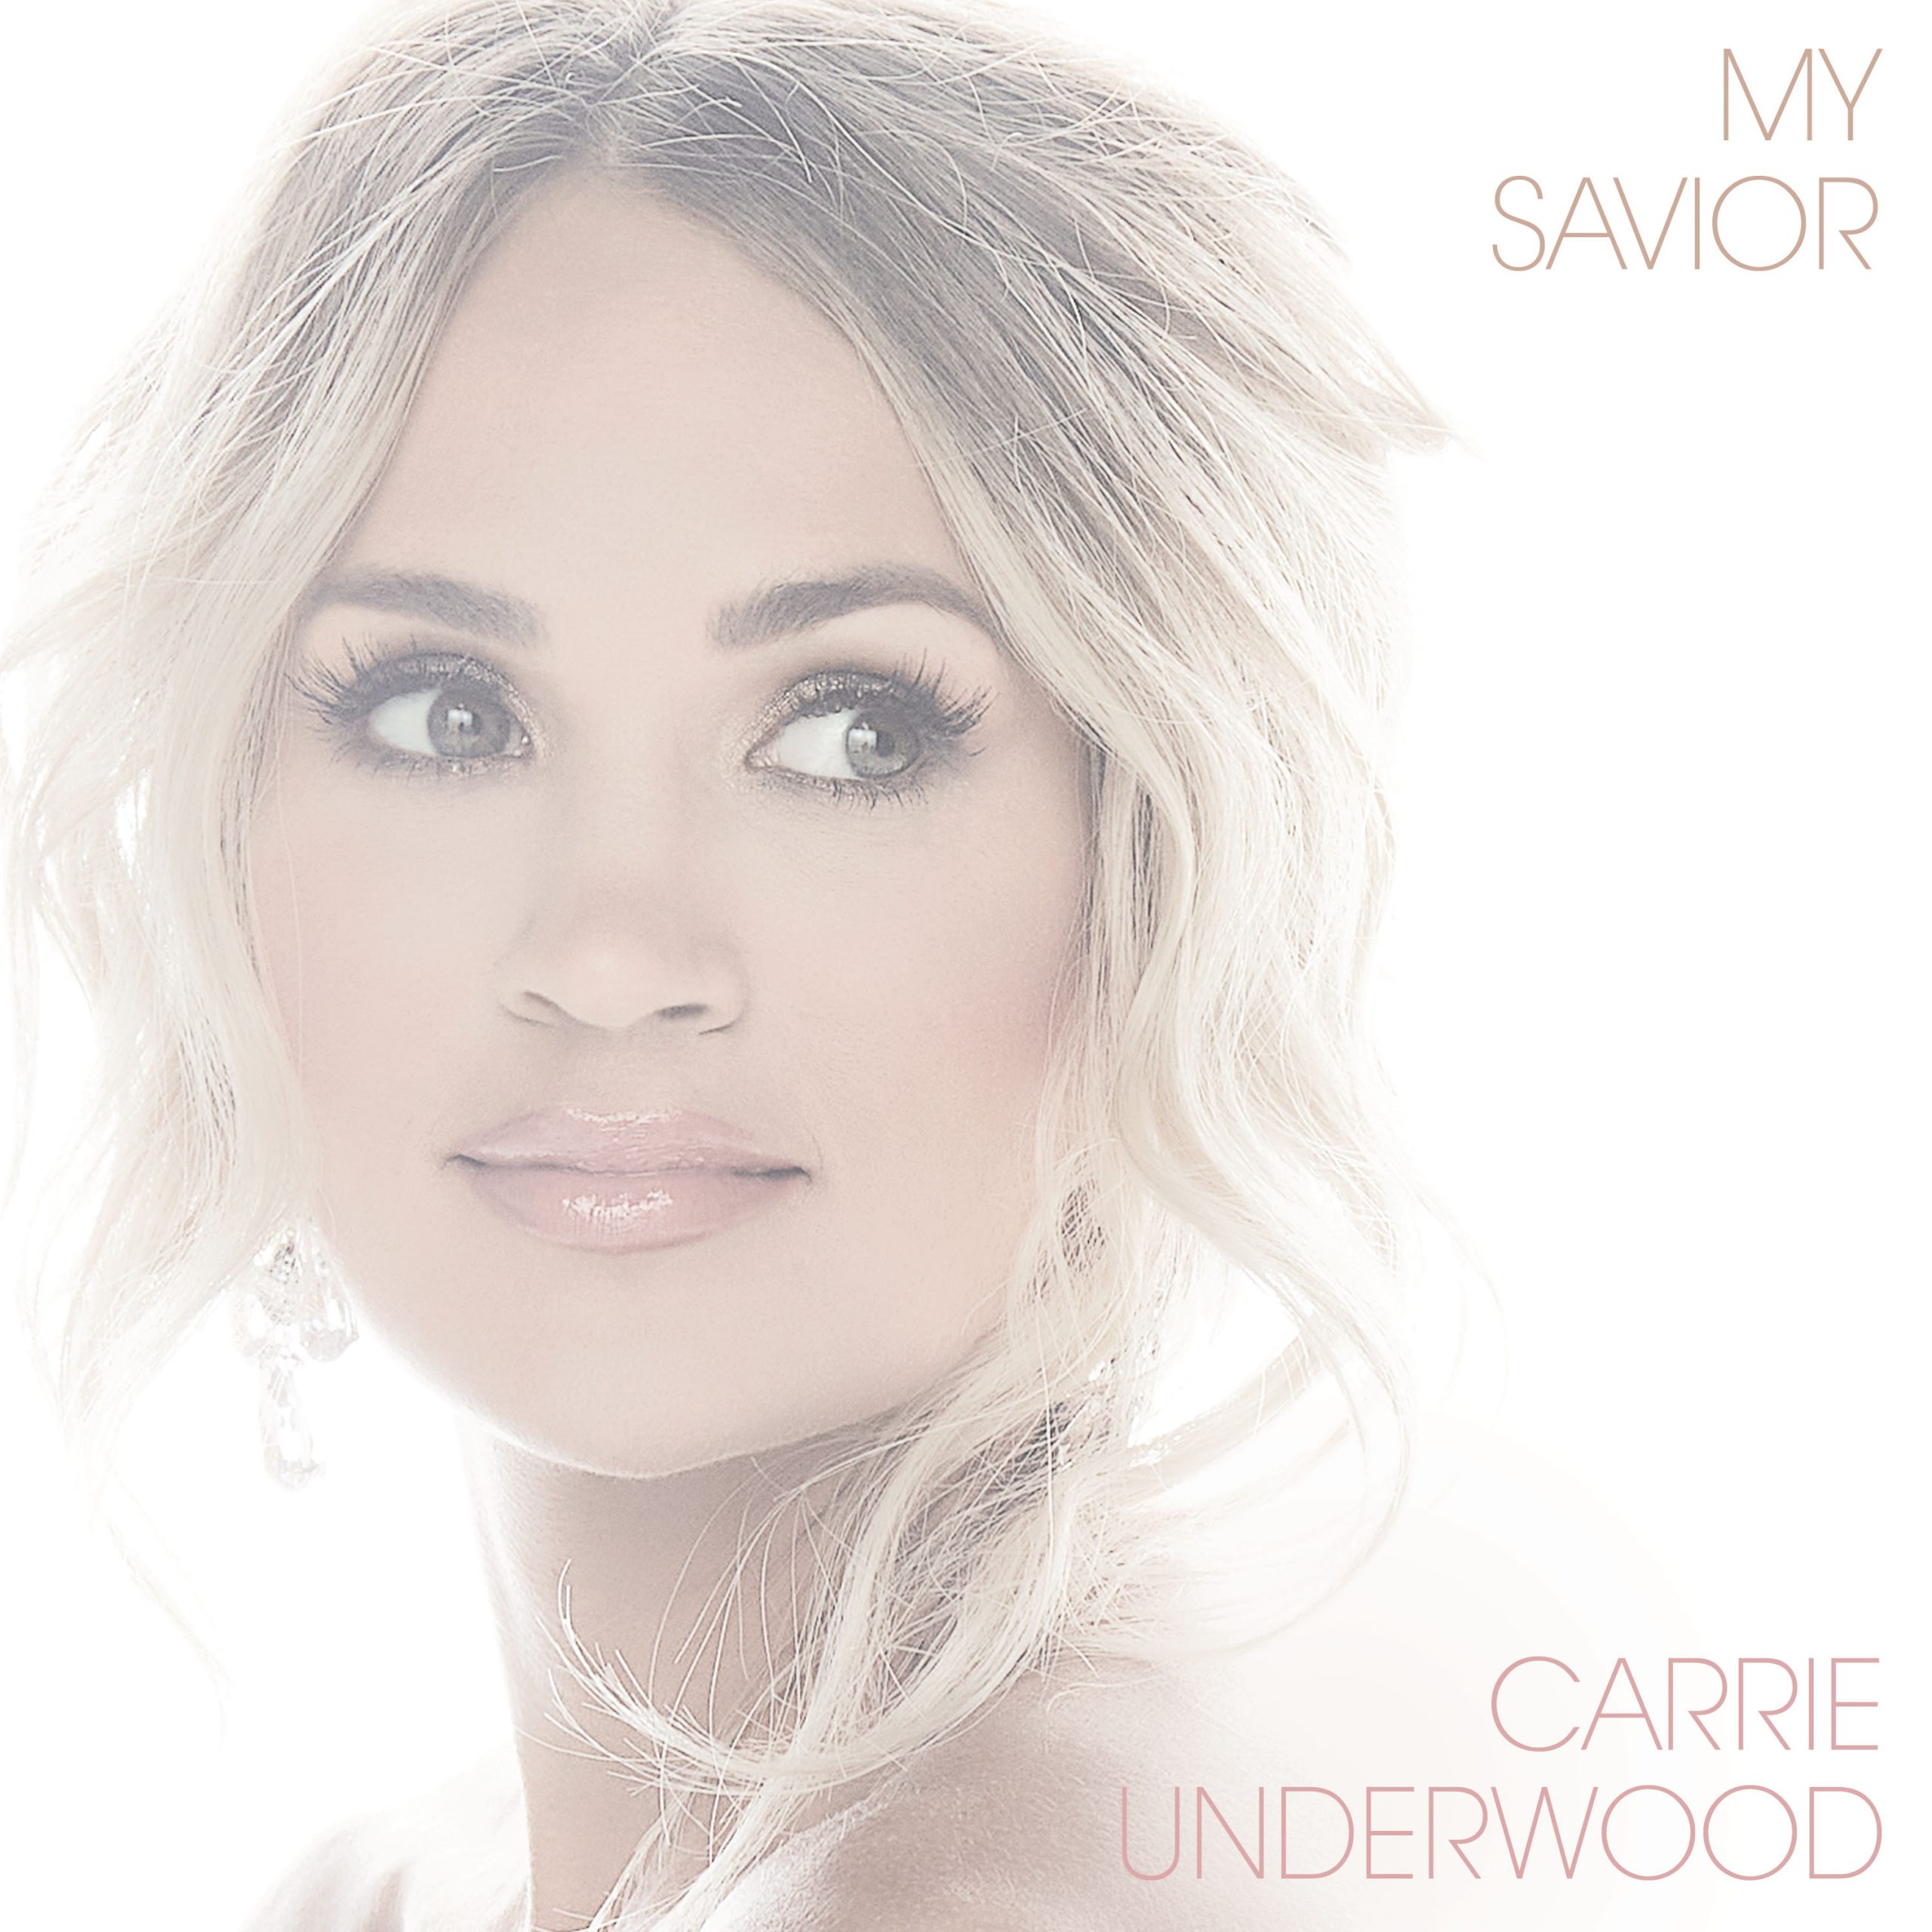 Listen to carrie underwood great is thy faithfulness